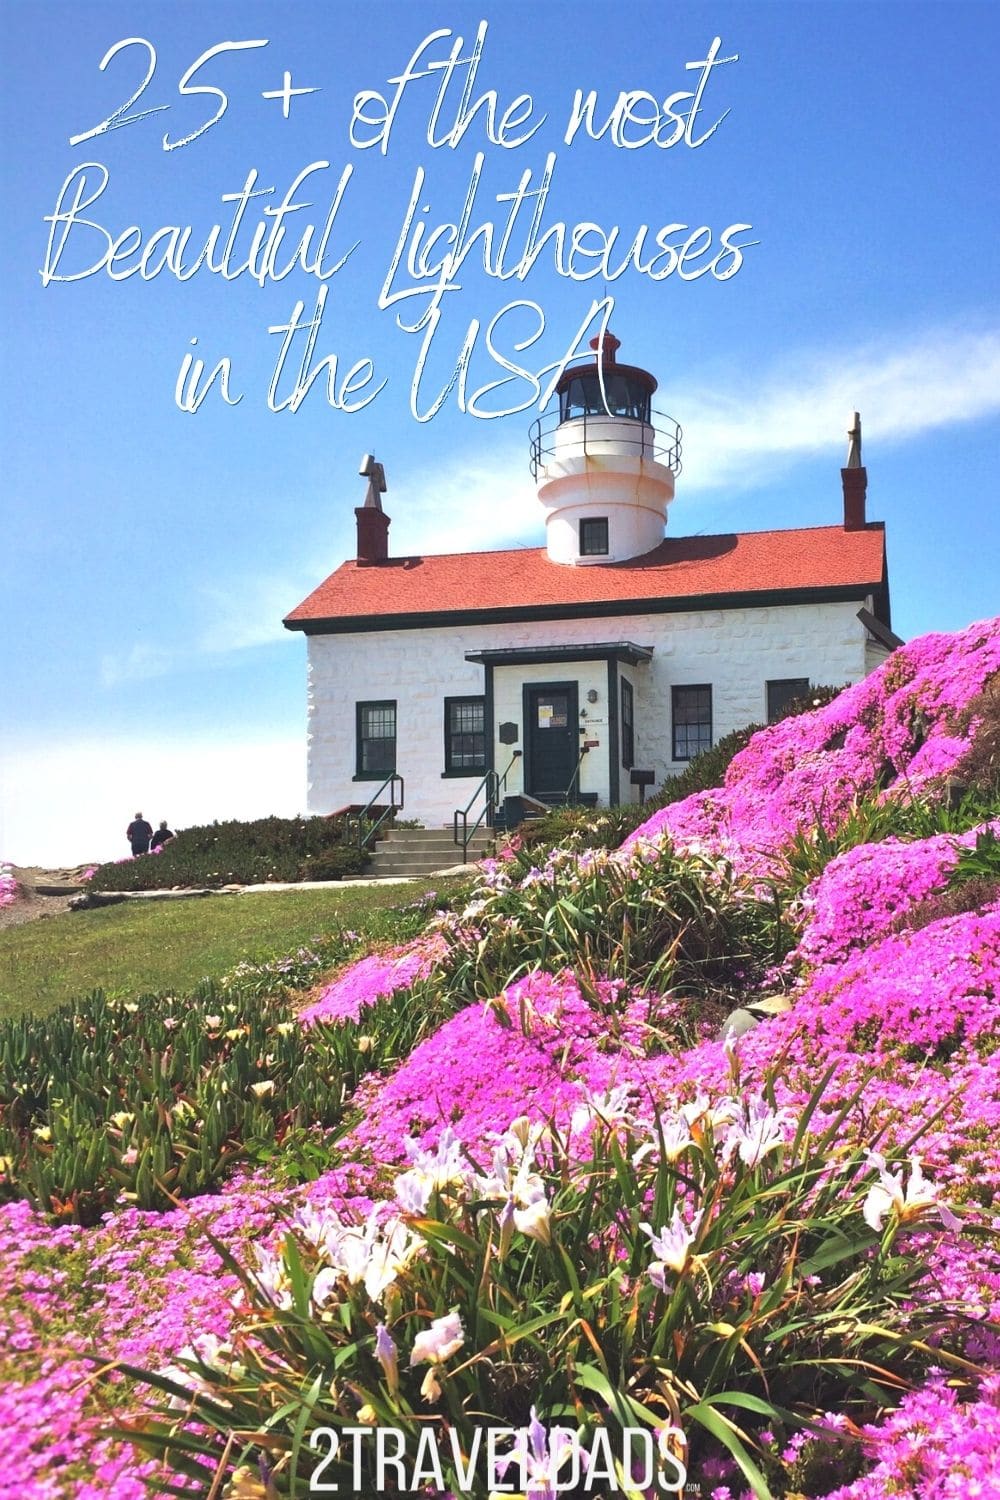 There are more than 100 lighthouses in the USA. These picks are beautiful, easy to visit and make for picturesque road trip adventures, from the Florida Keys to the Oregon Coast.